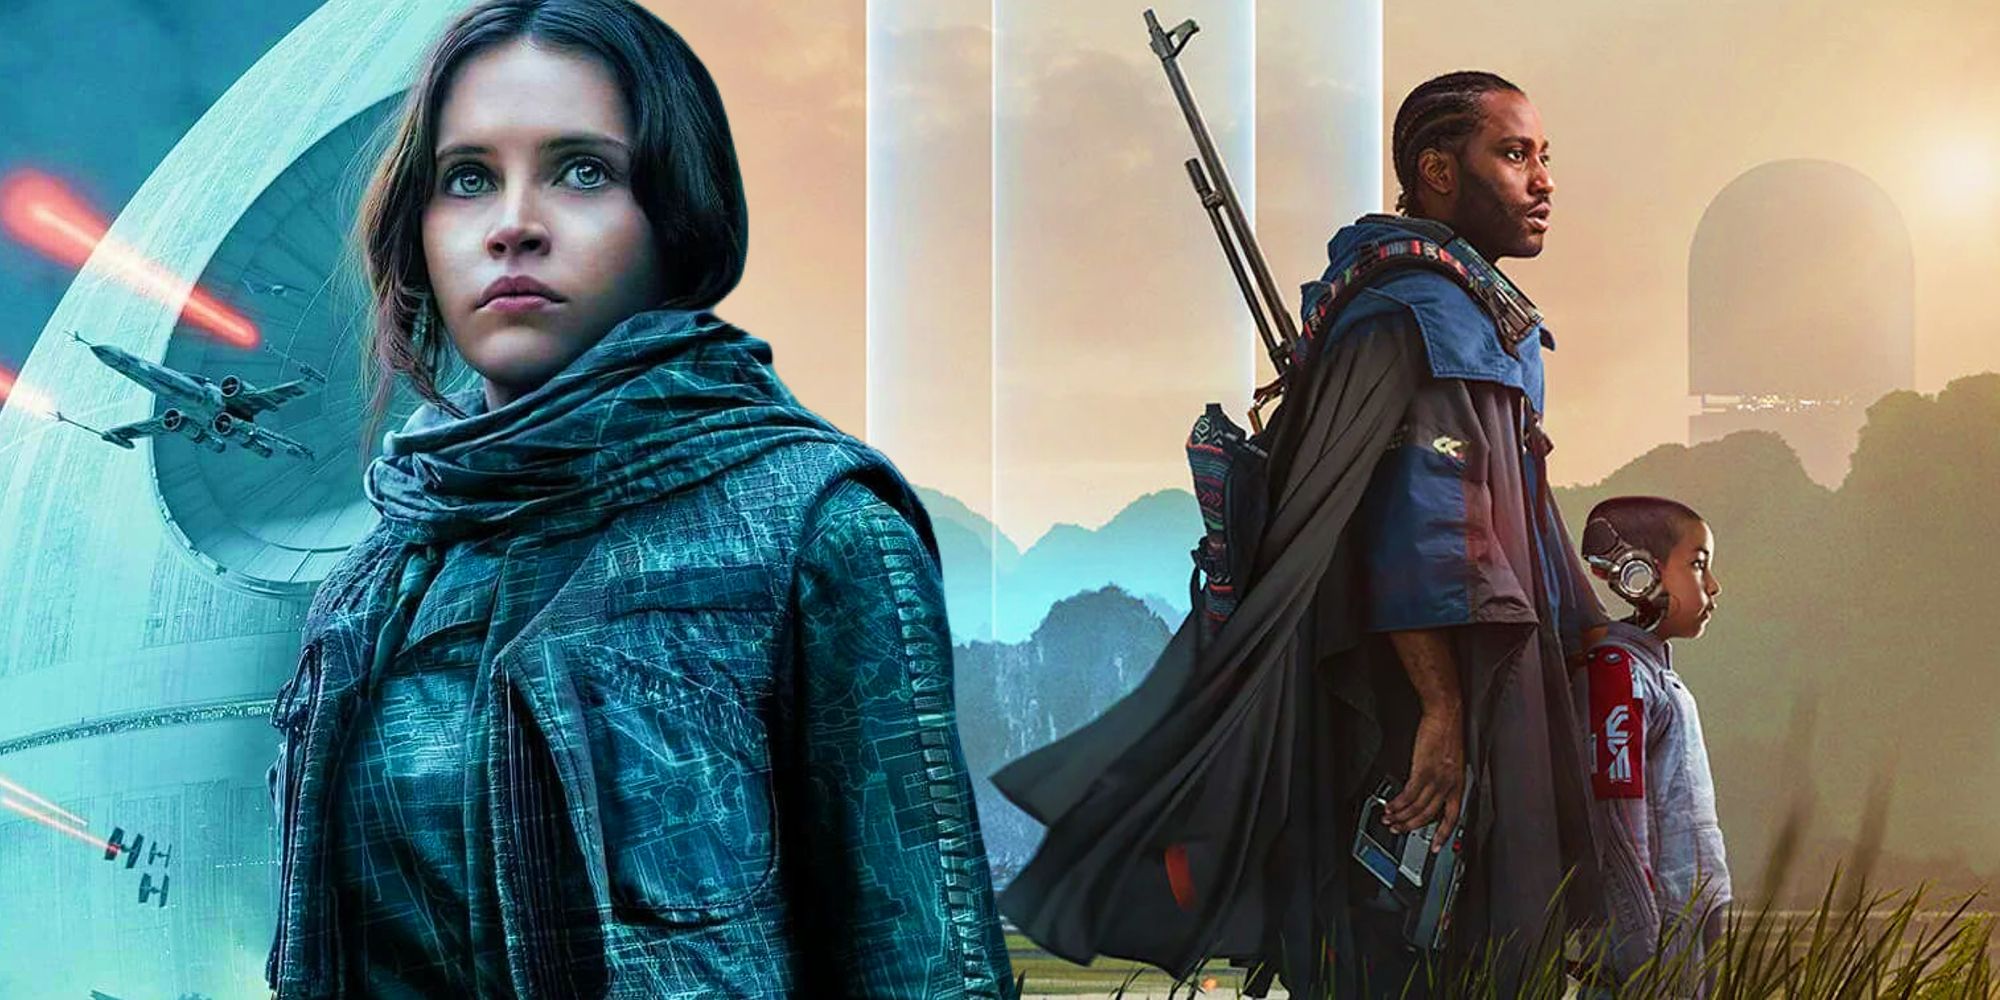 Jyn Erso in her Rogue One character poster next to the official poster for The Creator